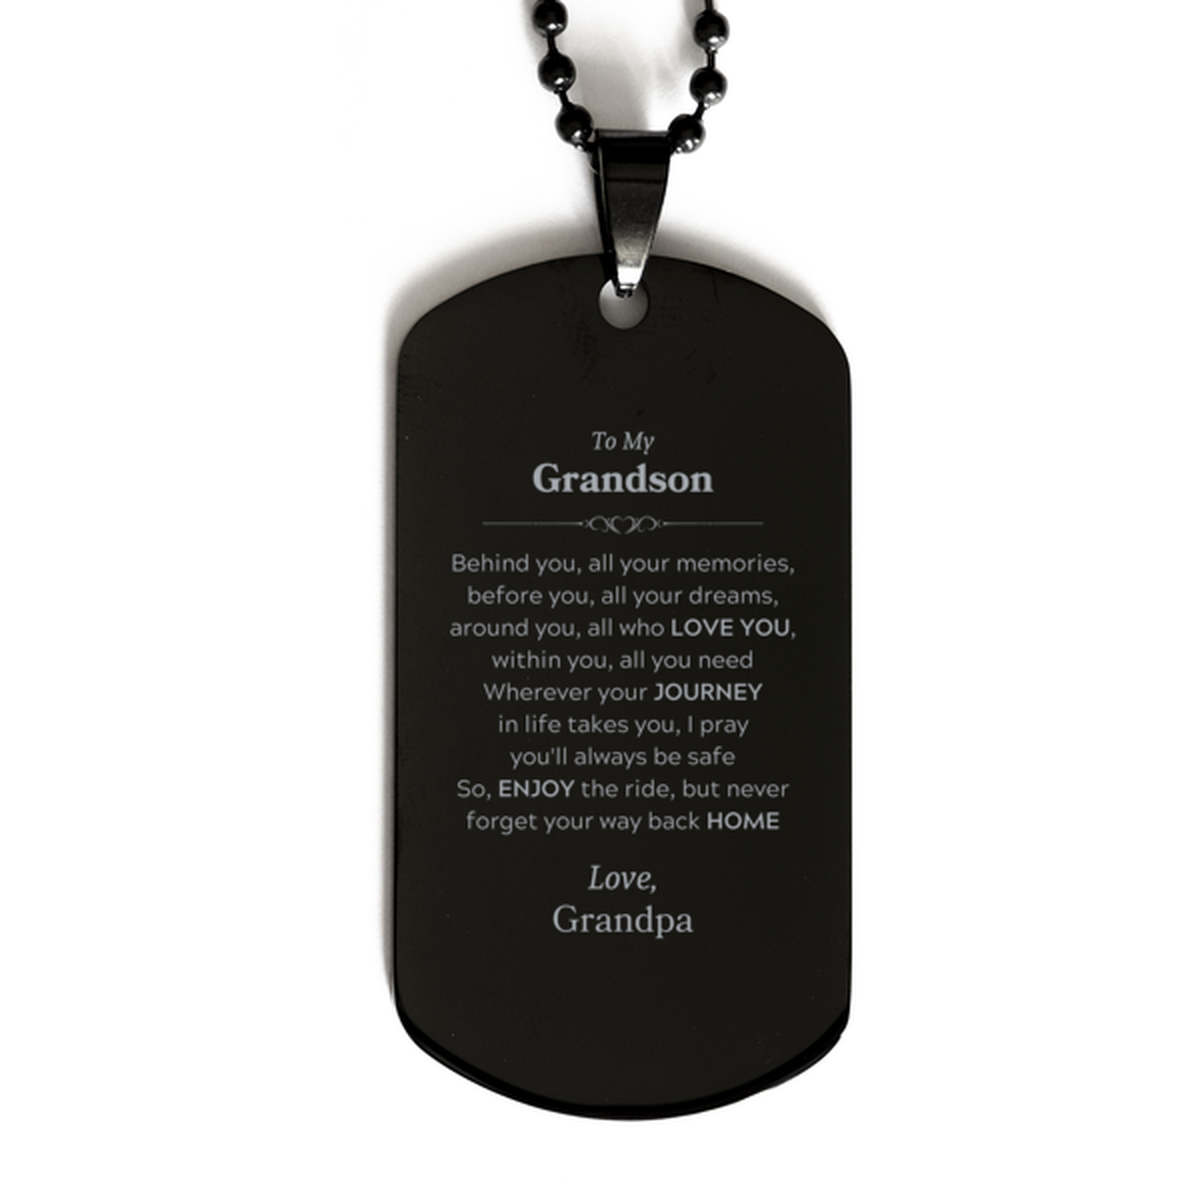 To My Grandson Graduation Gifts from Grandpa, Grandson Black Dog Tag Christmas Birthday Gifts for Grandson Behind you, all your memories, before you, all your dreams. Love, Grandpa